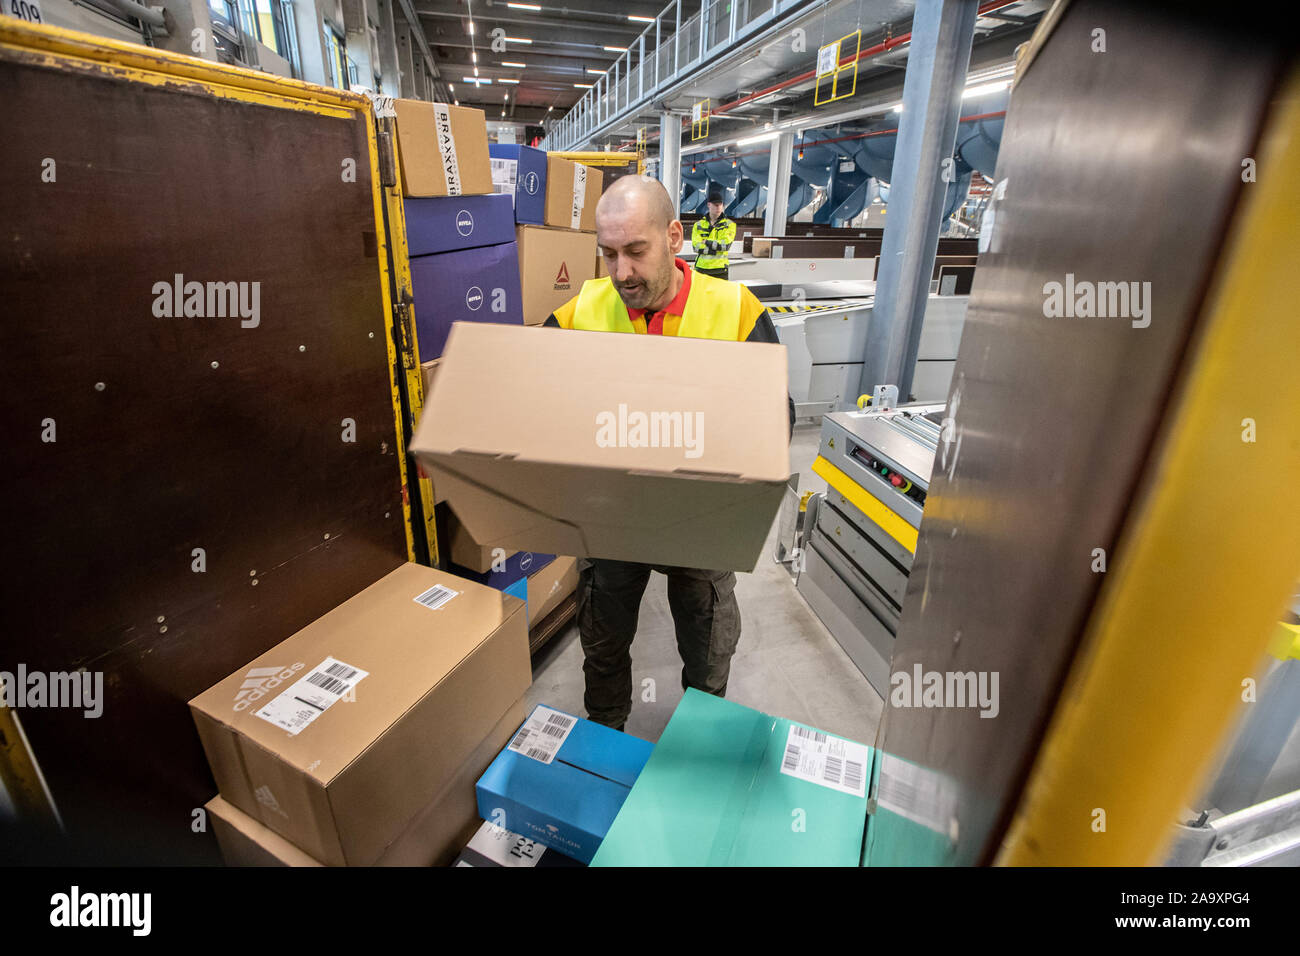 Bochum, Germany. 18th Nov, 2019. Delivery driver Franko places a parcel in  a transport cart. Deutsche Post DHL has opened a new parcel centre on the  former Opel site. With a sorting